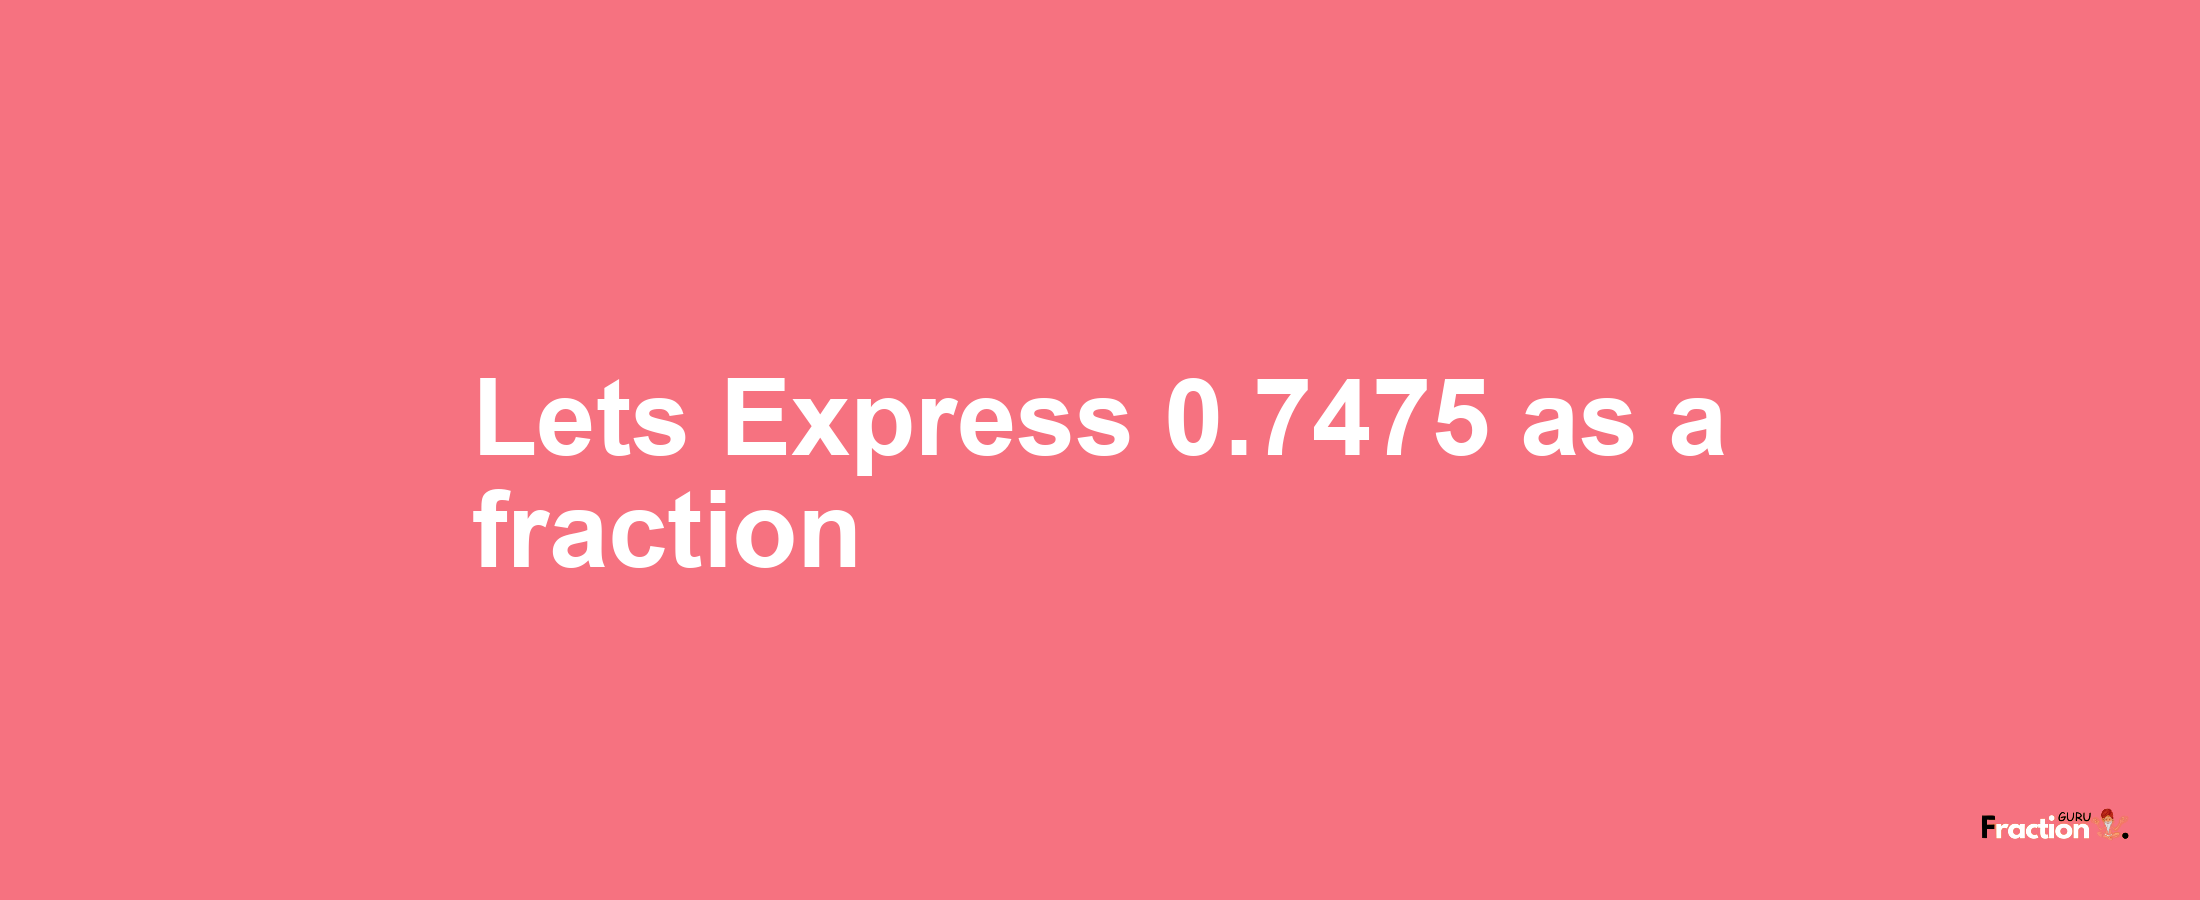 Lets Express 0.7475 as afraction